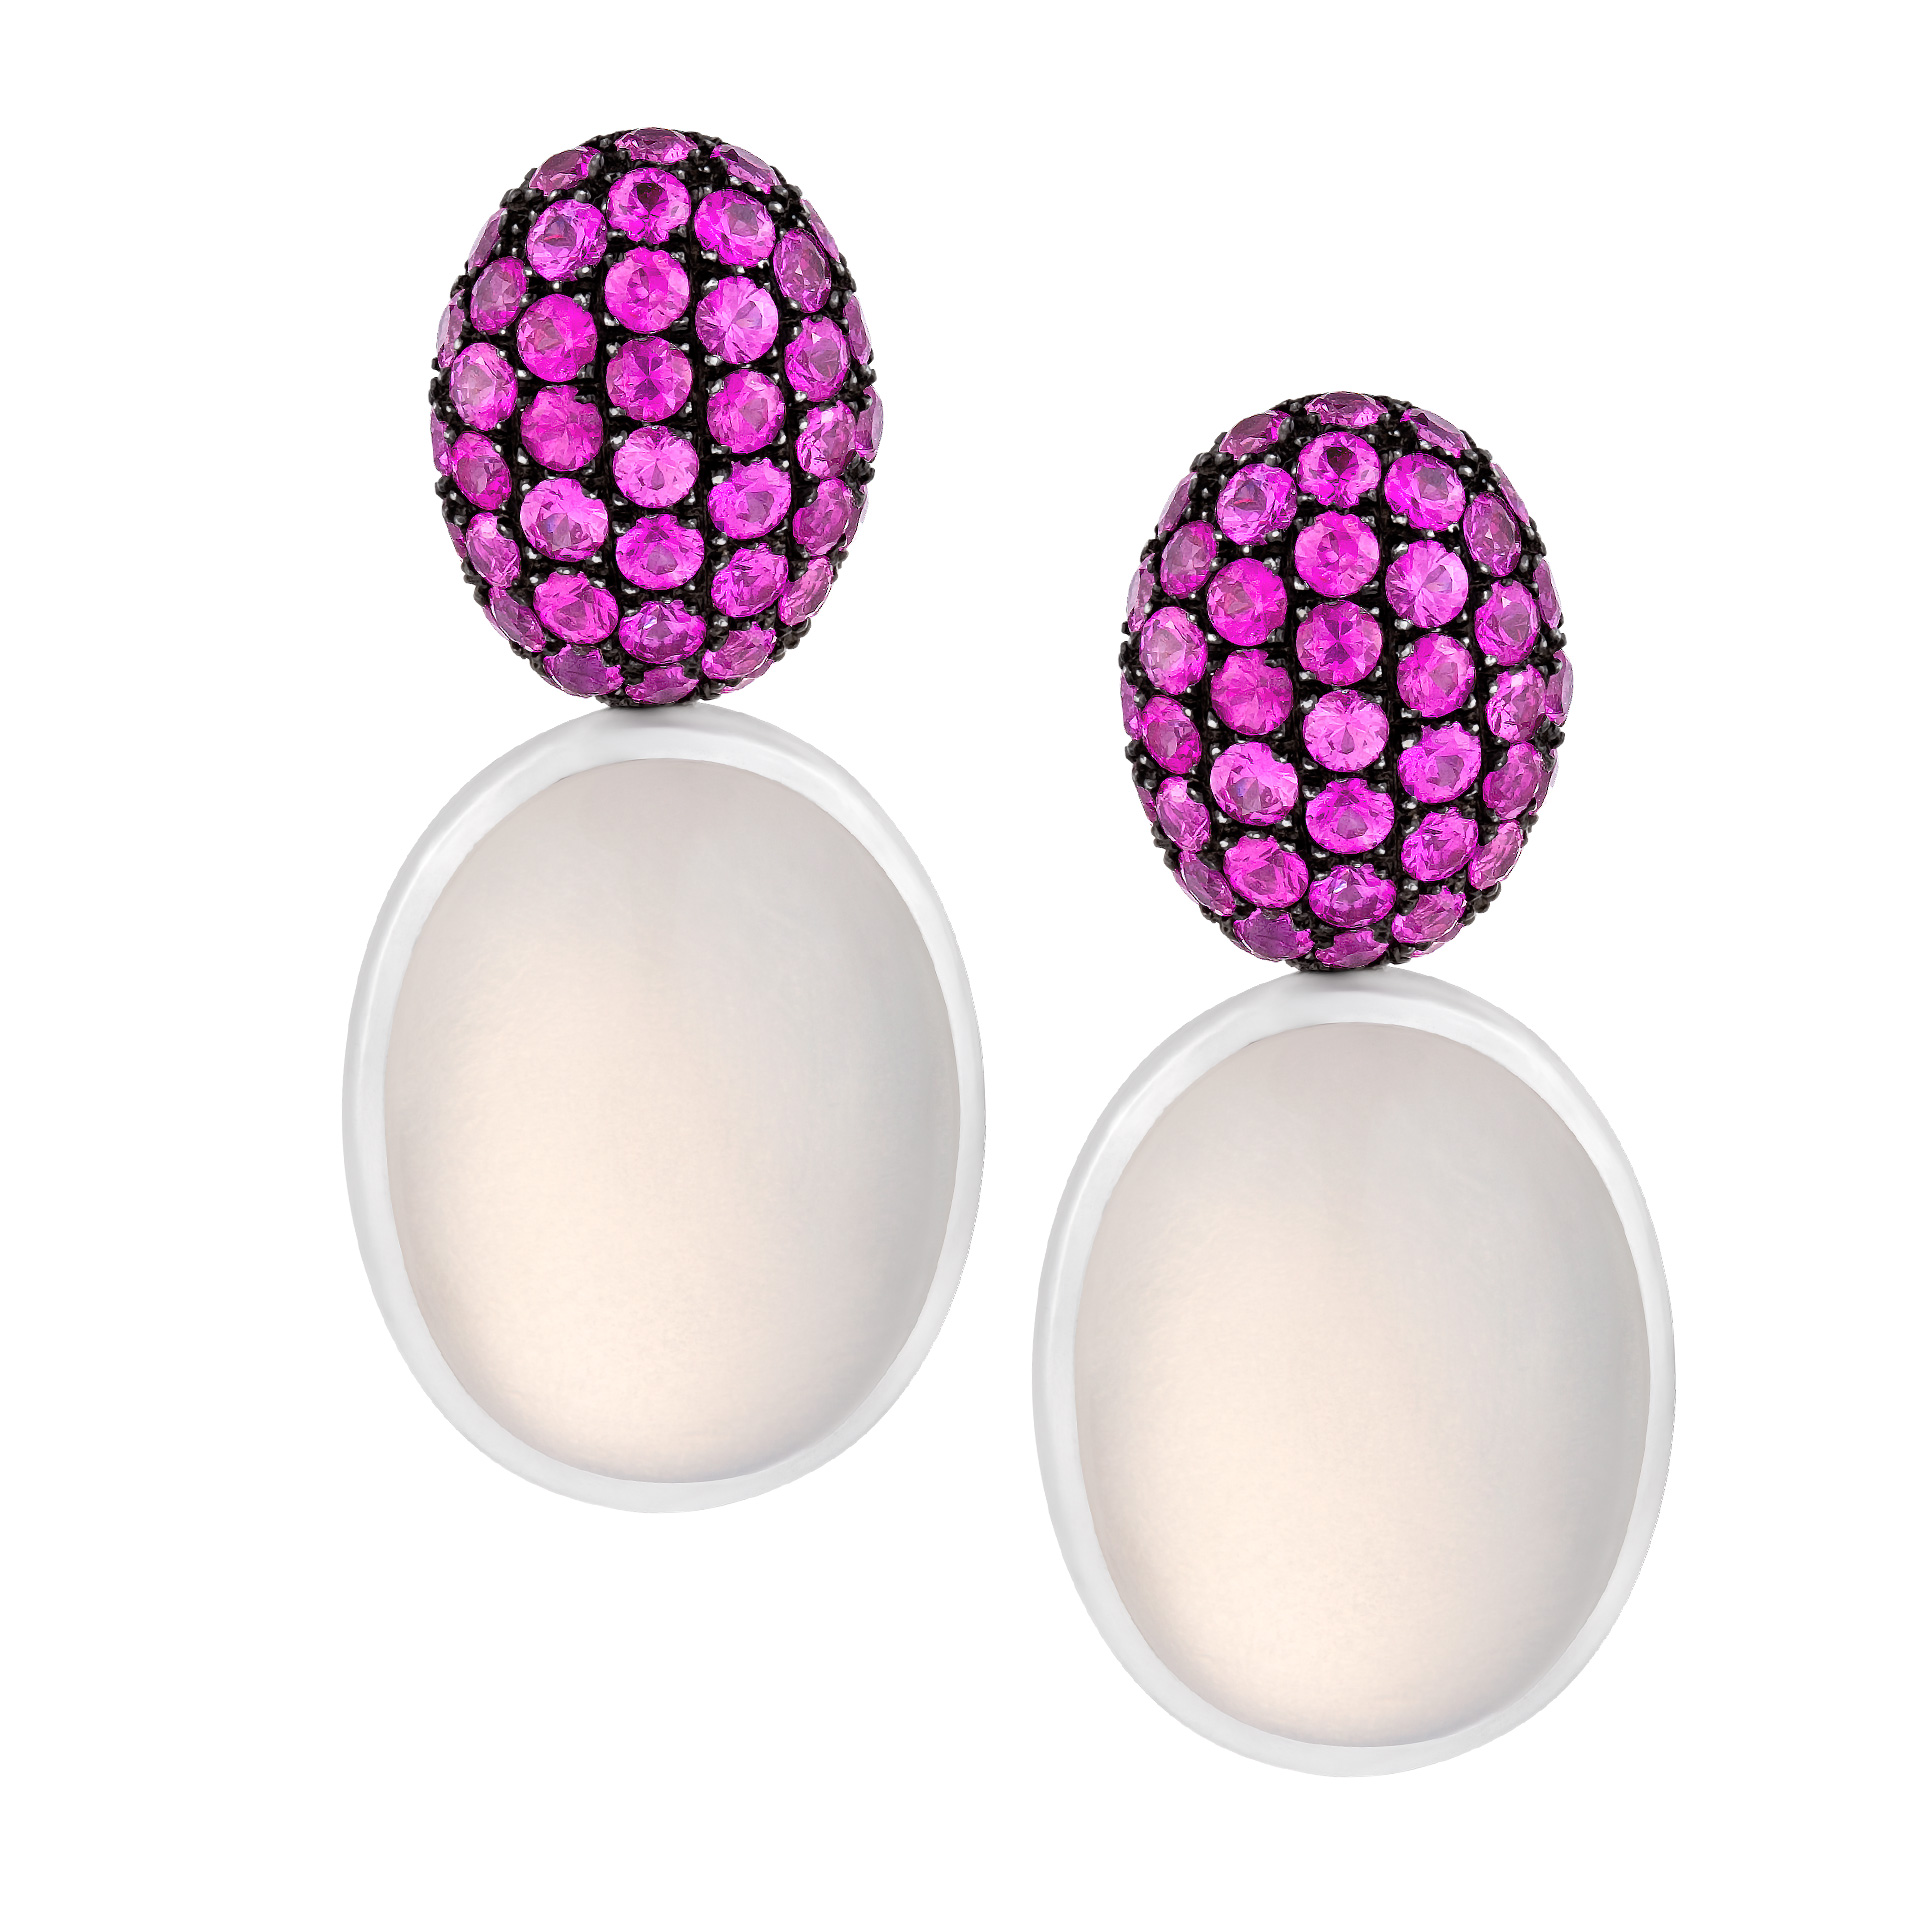 Pink sapphire and moonstone earrings set in 18k white gold with PVD